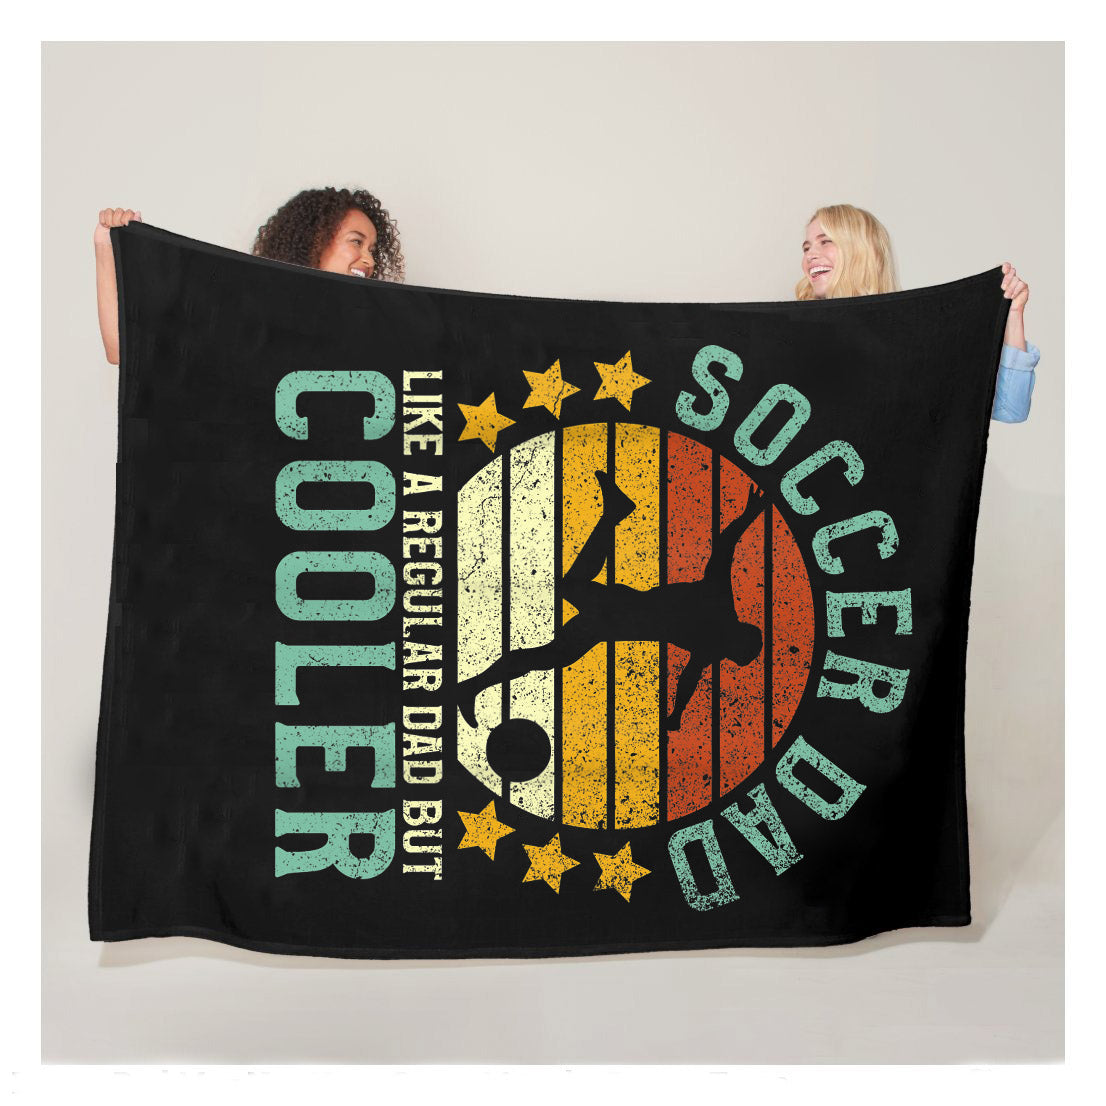 Soccer Dad Just Like Normal Dad Soccer Dad Tee Fleece Blanket,  Soccer Blankets, Soccer Gifts, Happy Fathers Day Gift Ideas For Dad